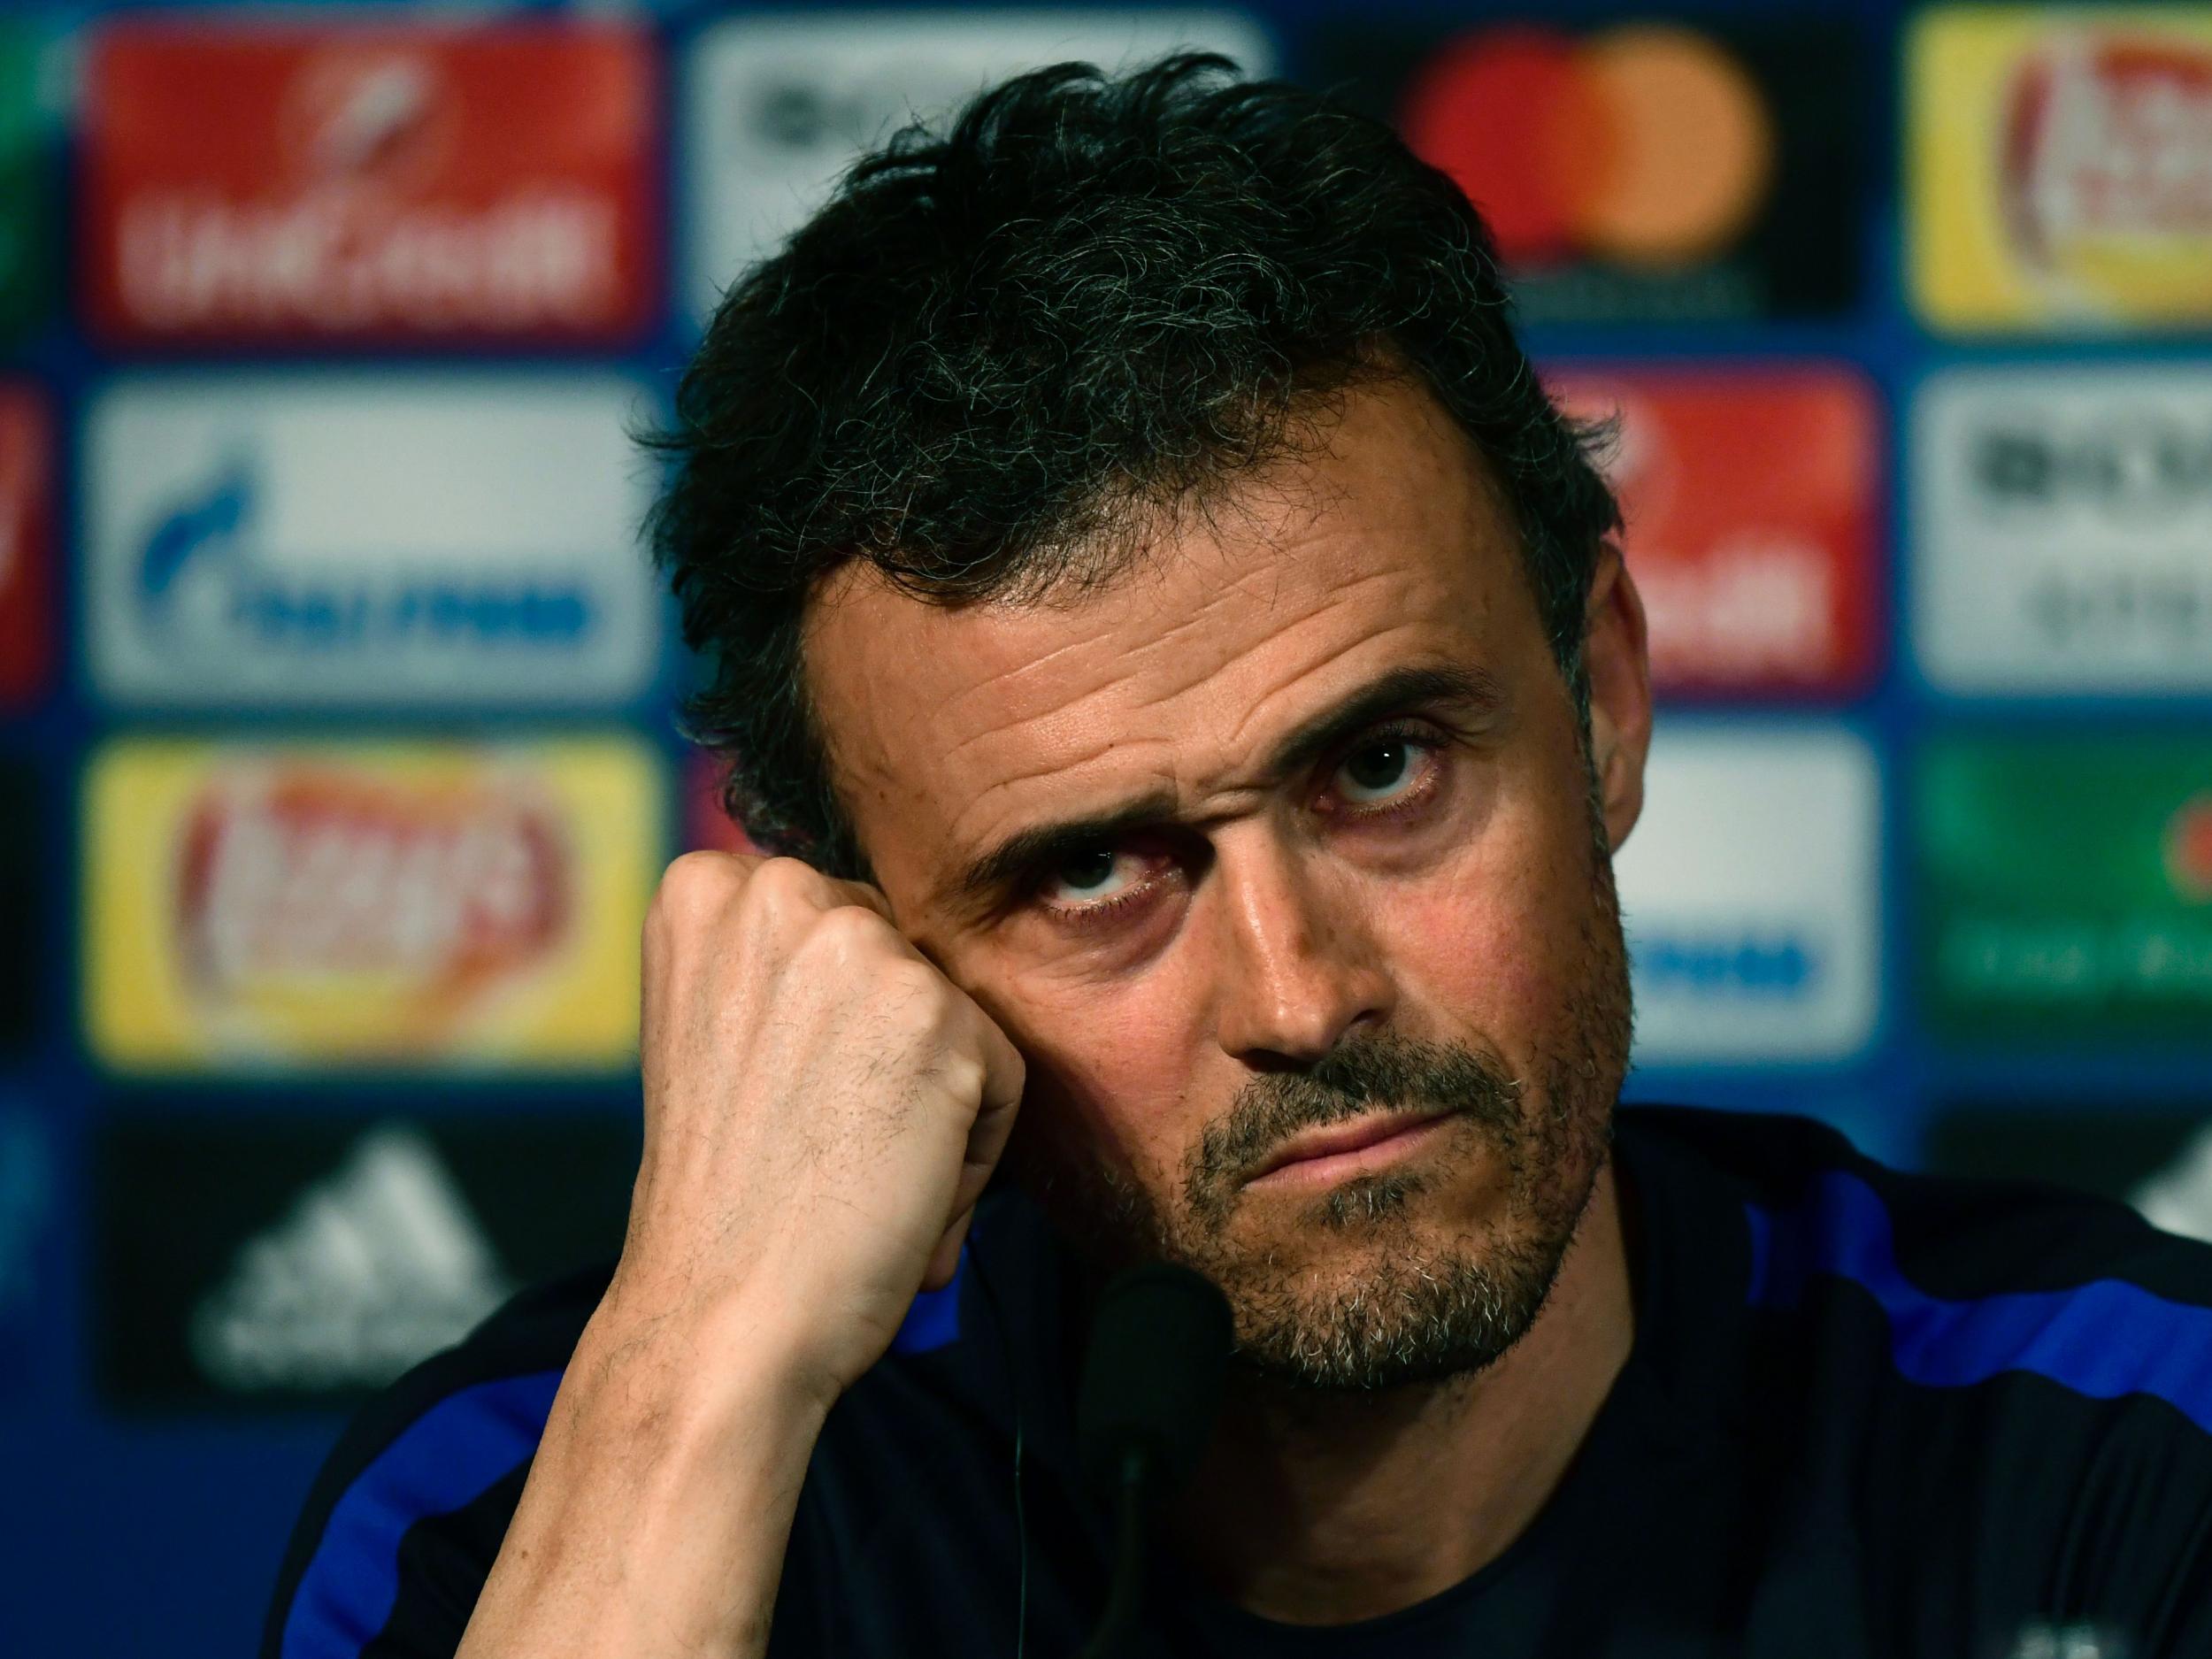 Luis Enrique conducted a strained post-match interview with TV3